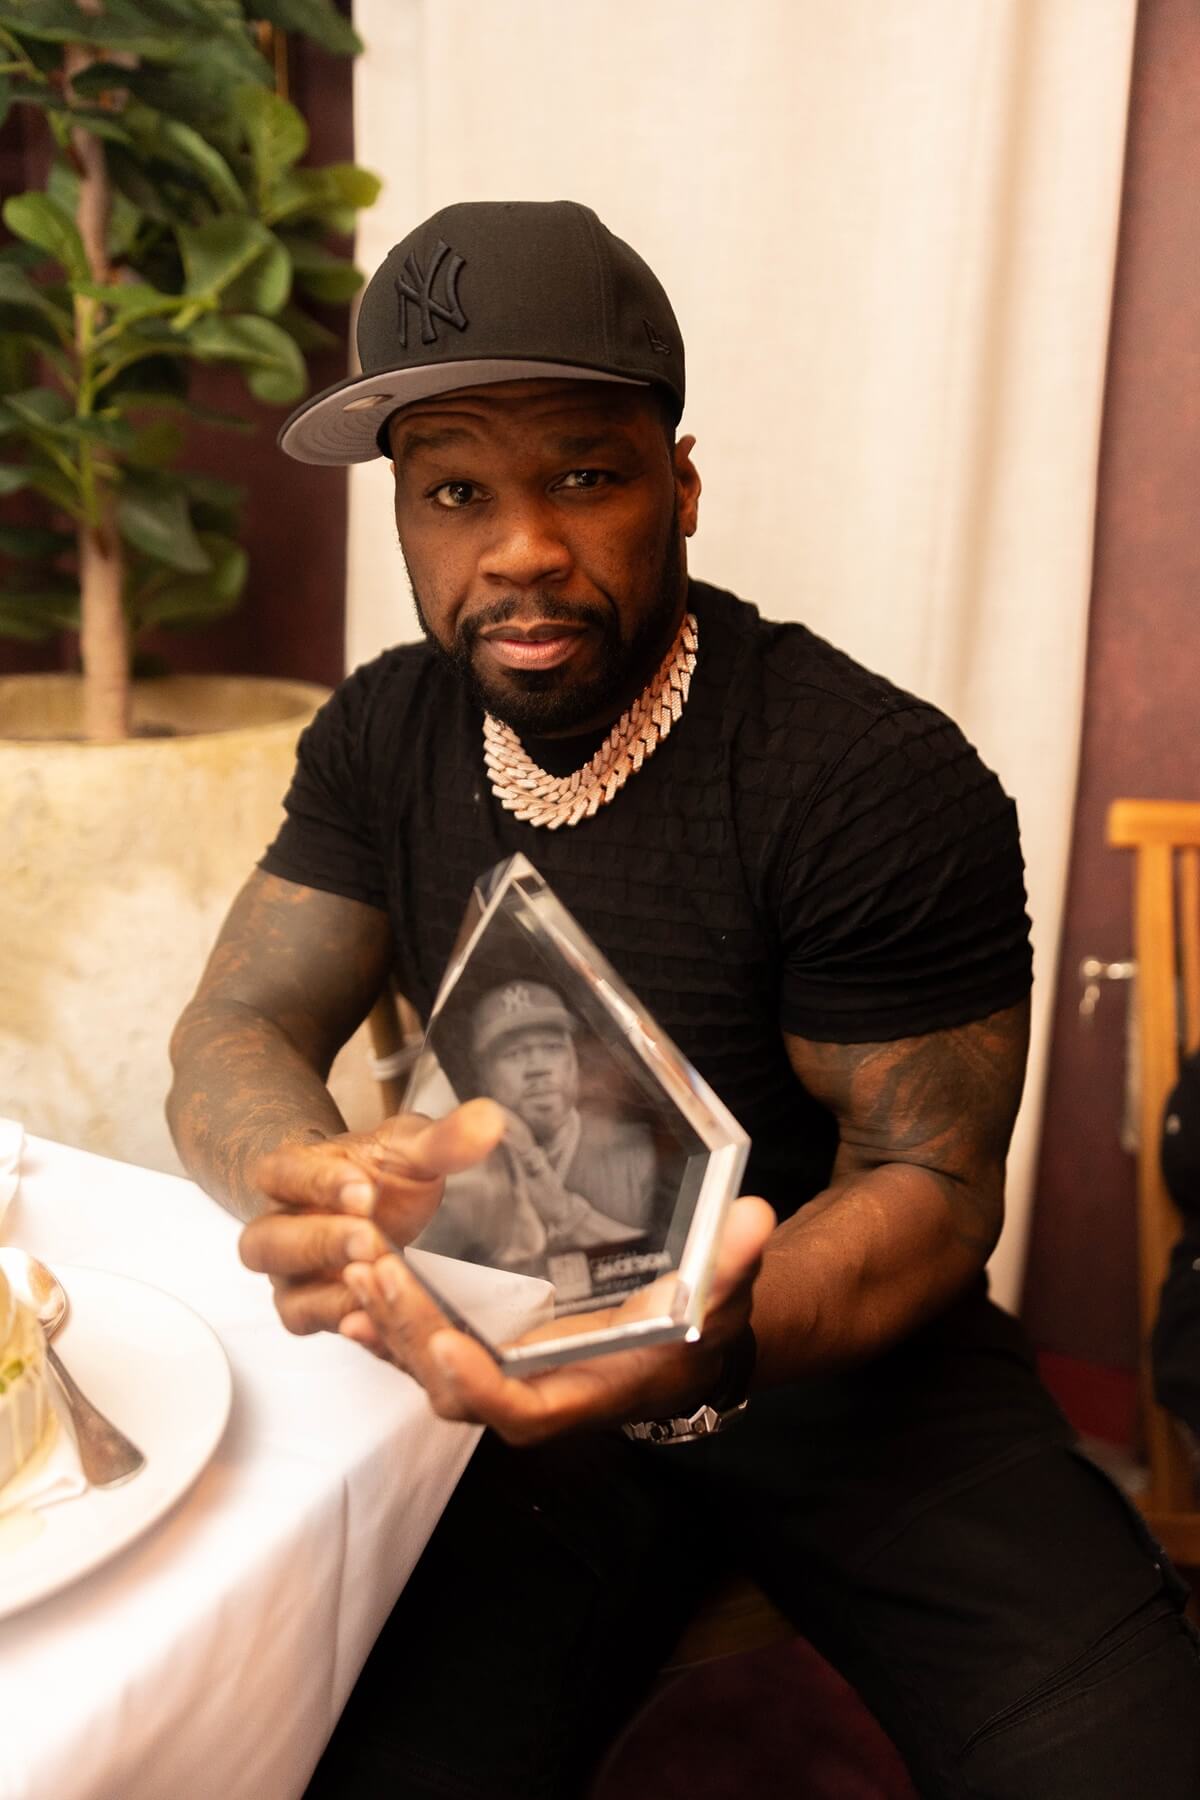 50 Cent Lost Weight, And He Looks .. Different